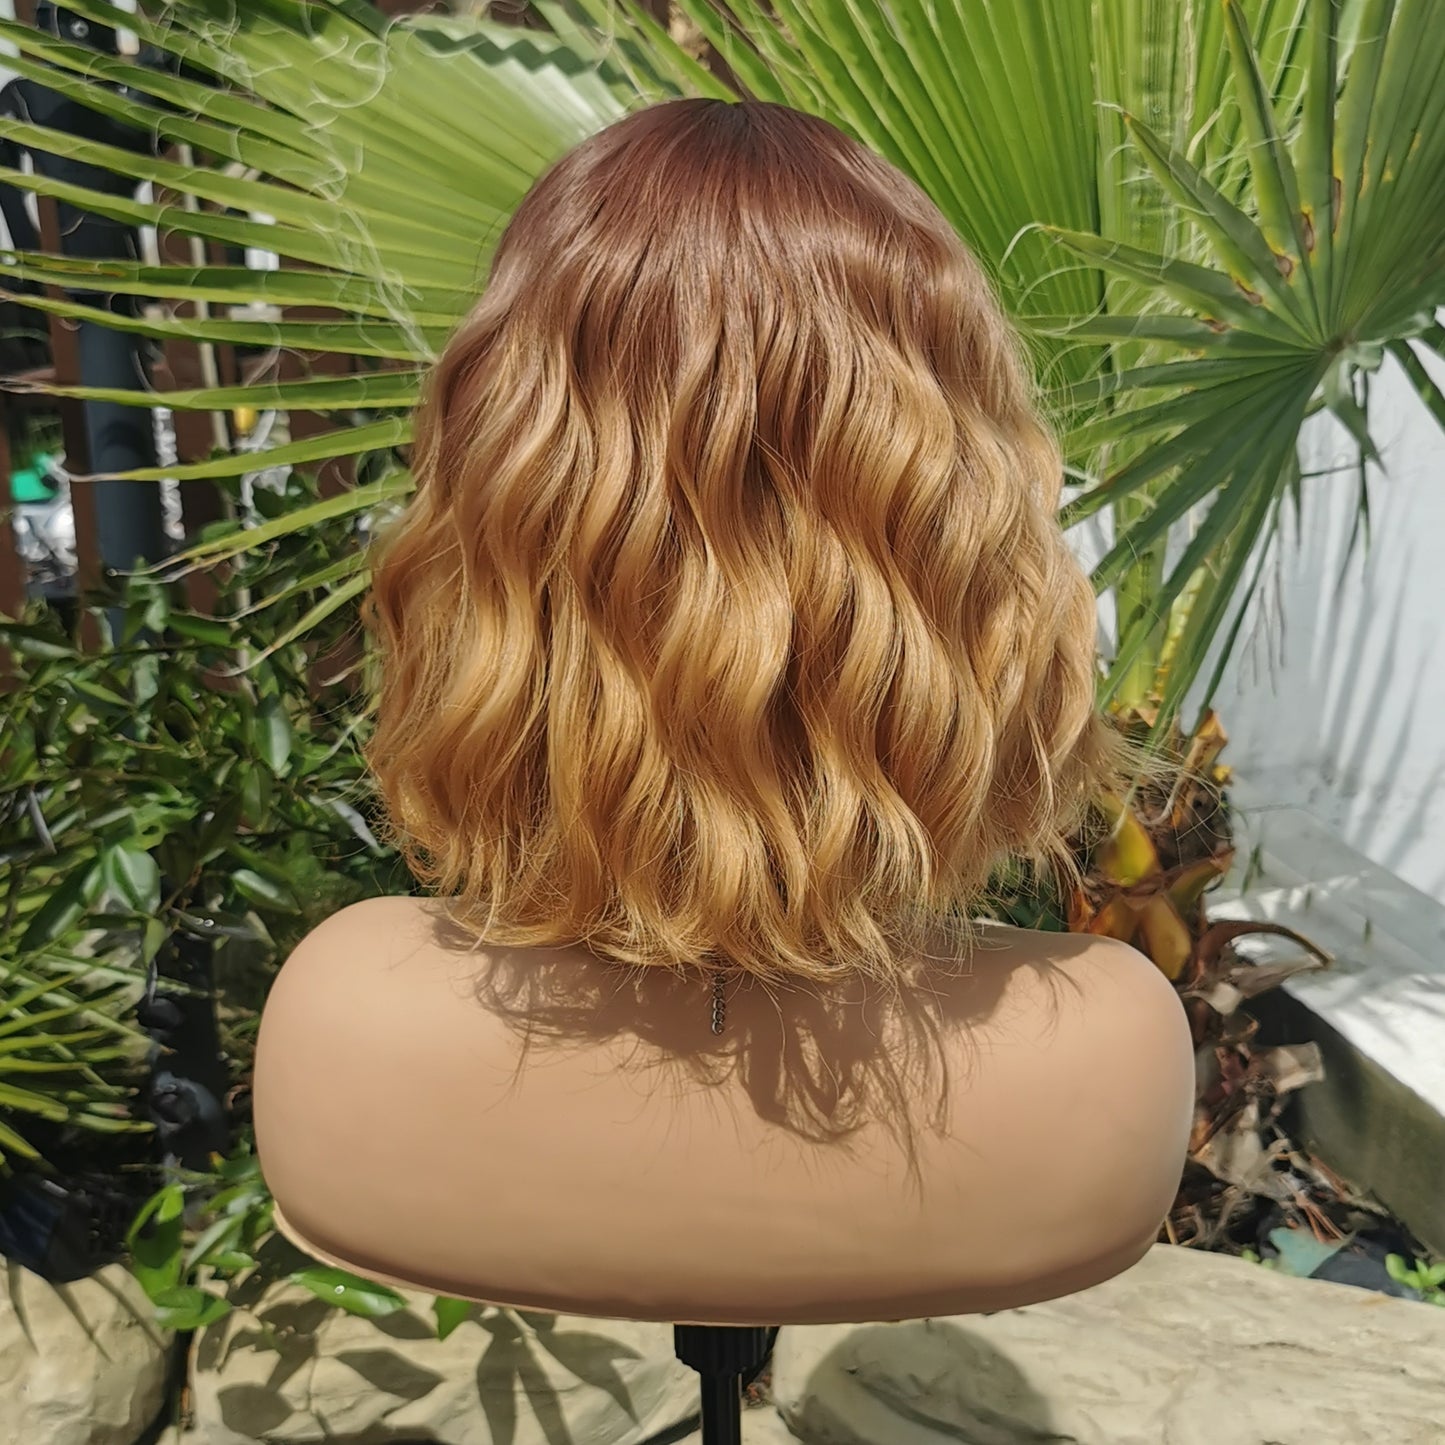 Highland Girl ginger synthetic wig